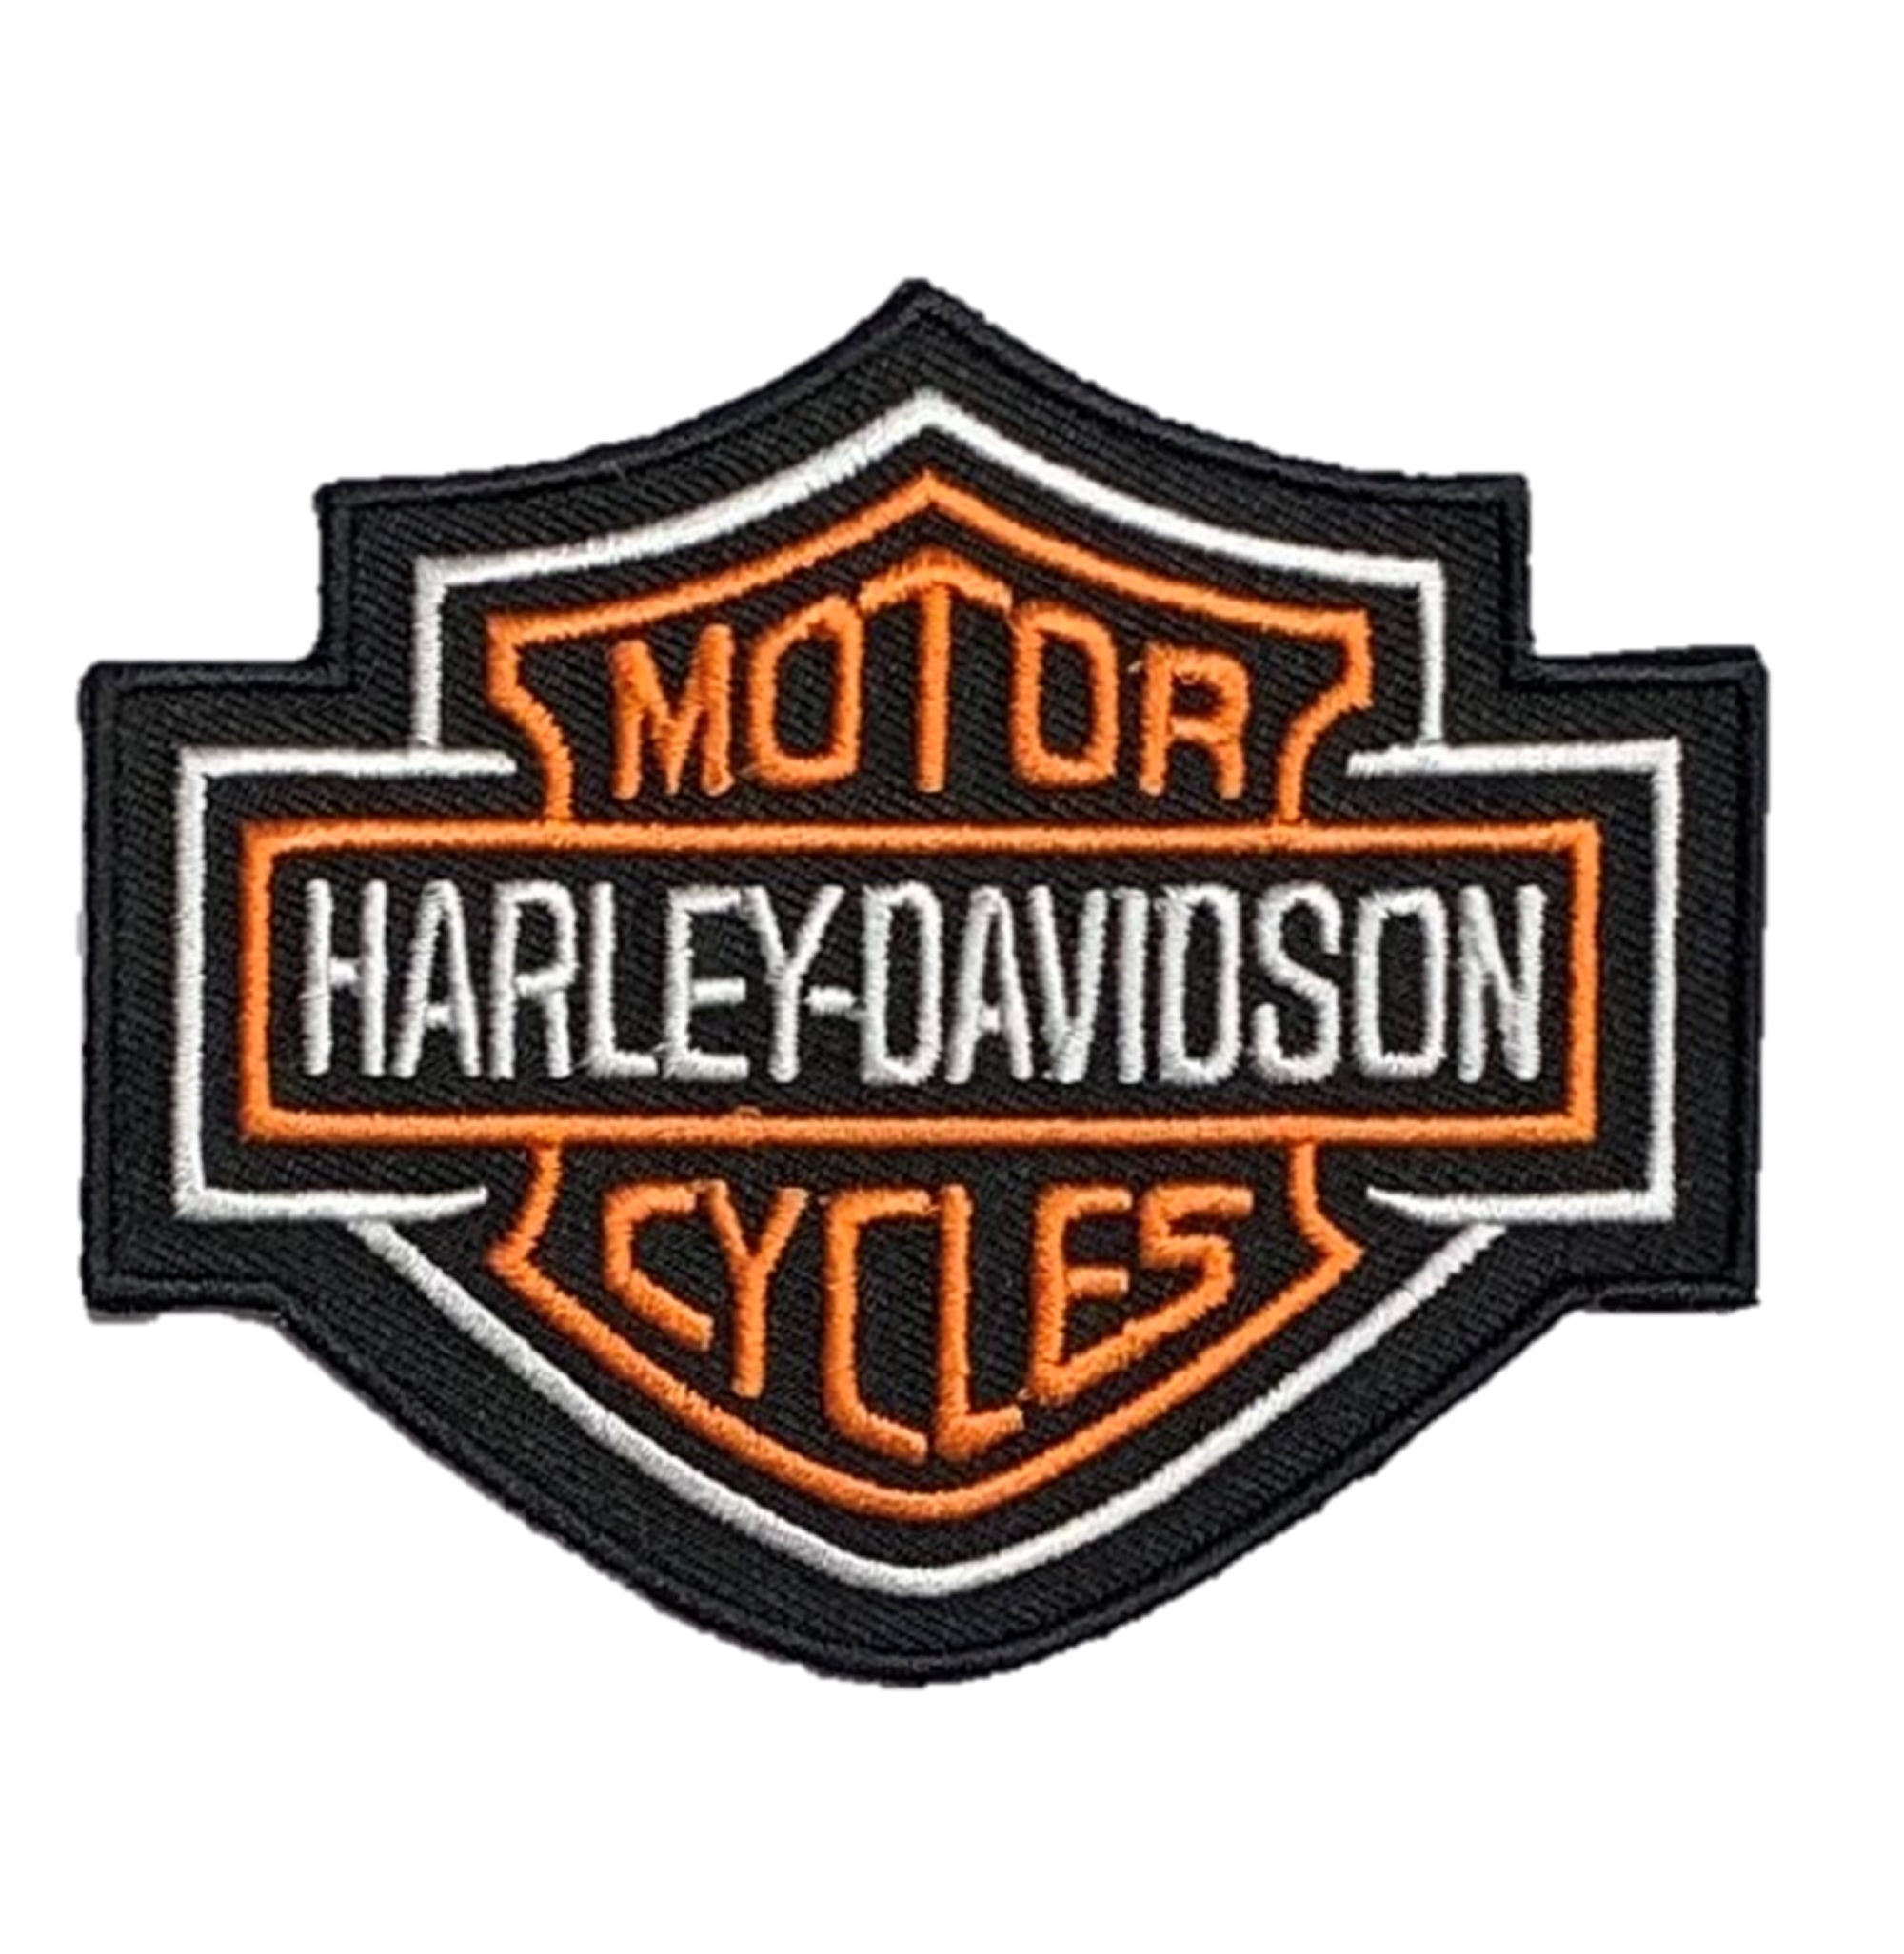 Embroidery Iron On patch Harley Davidson Fat Bob 